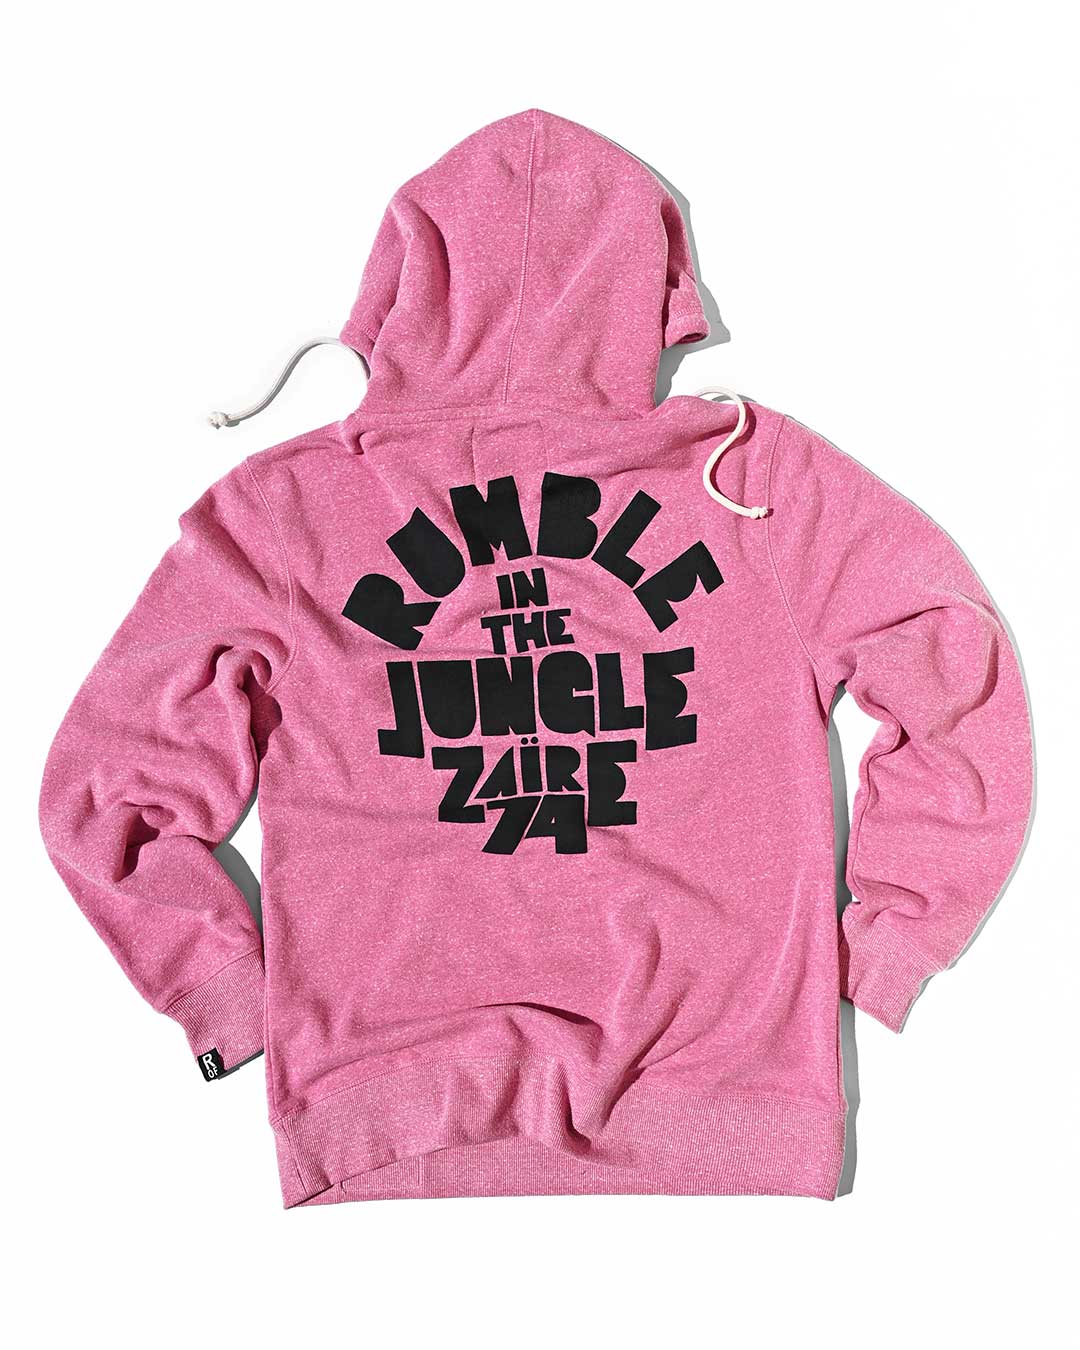 Ali Rumble in the Jungle Pink Hoody - Roots of Fight Canada